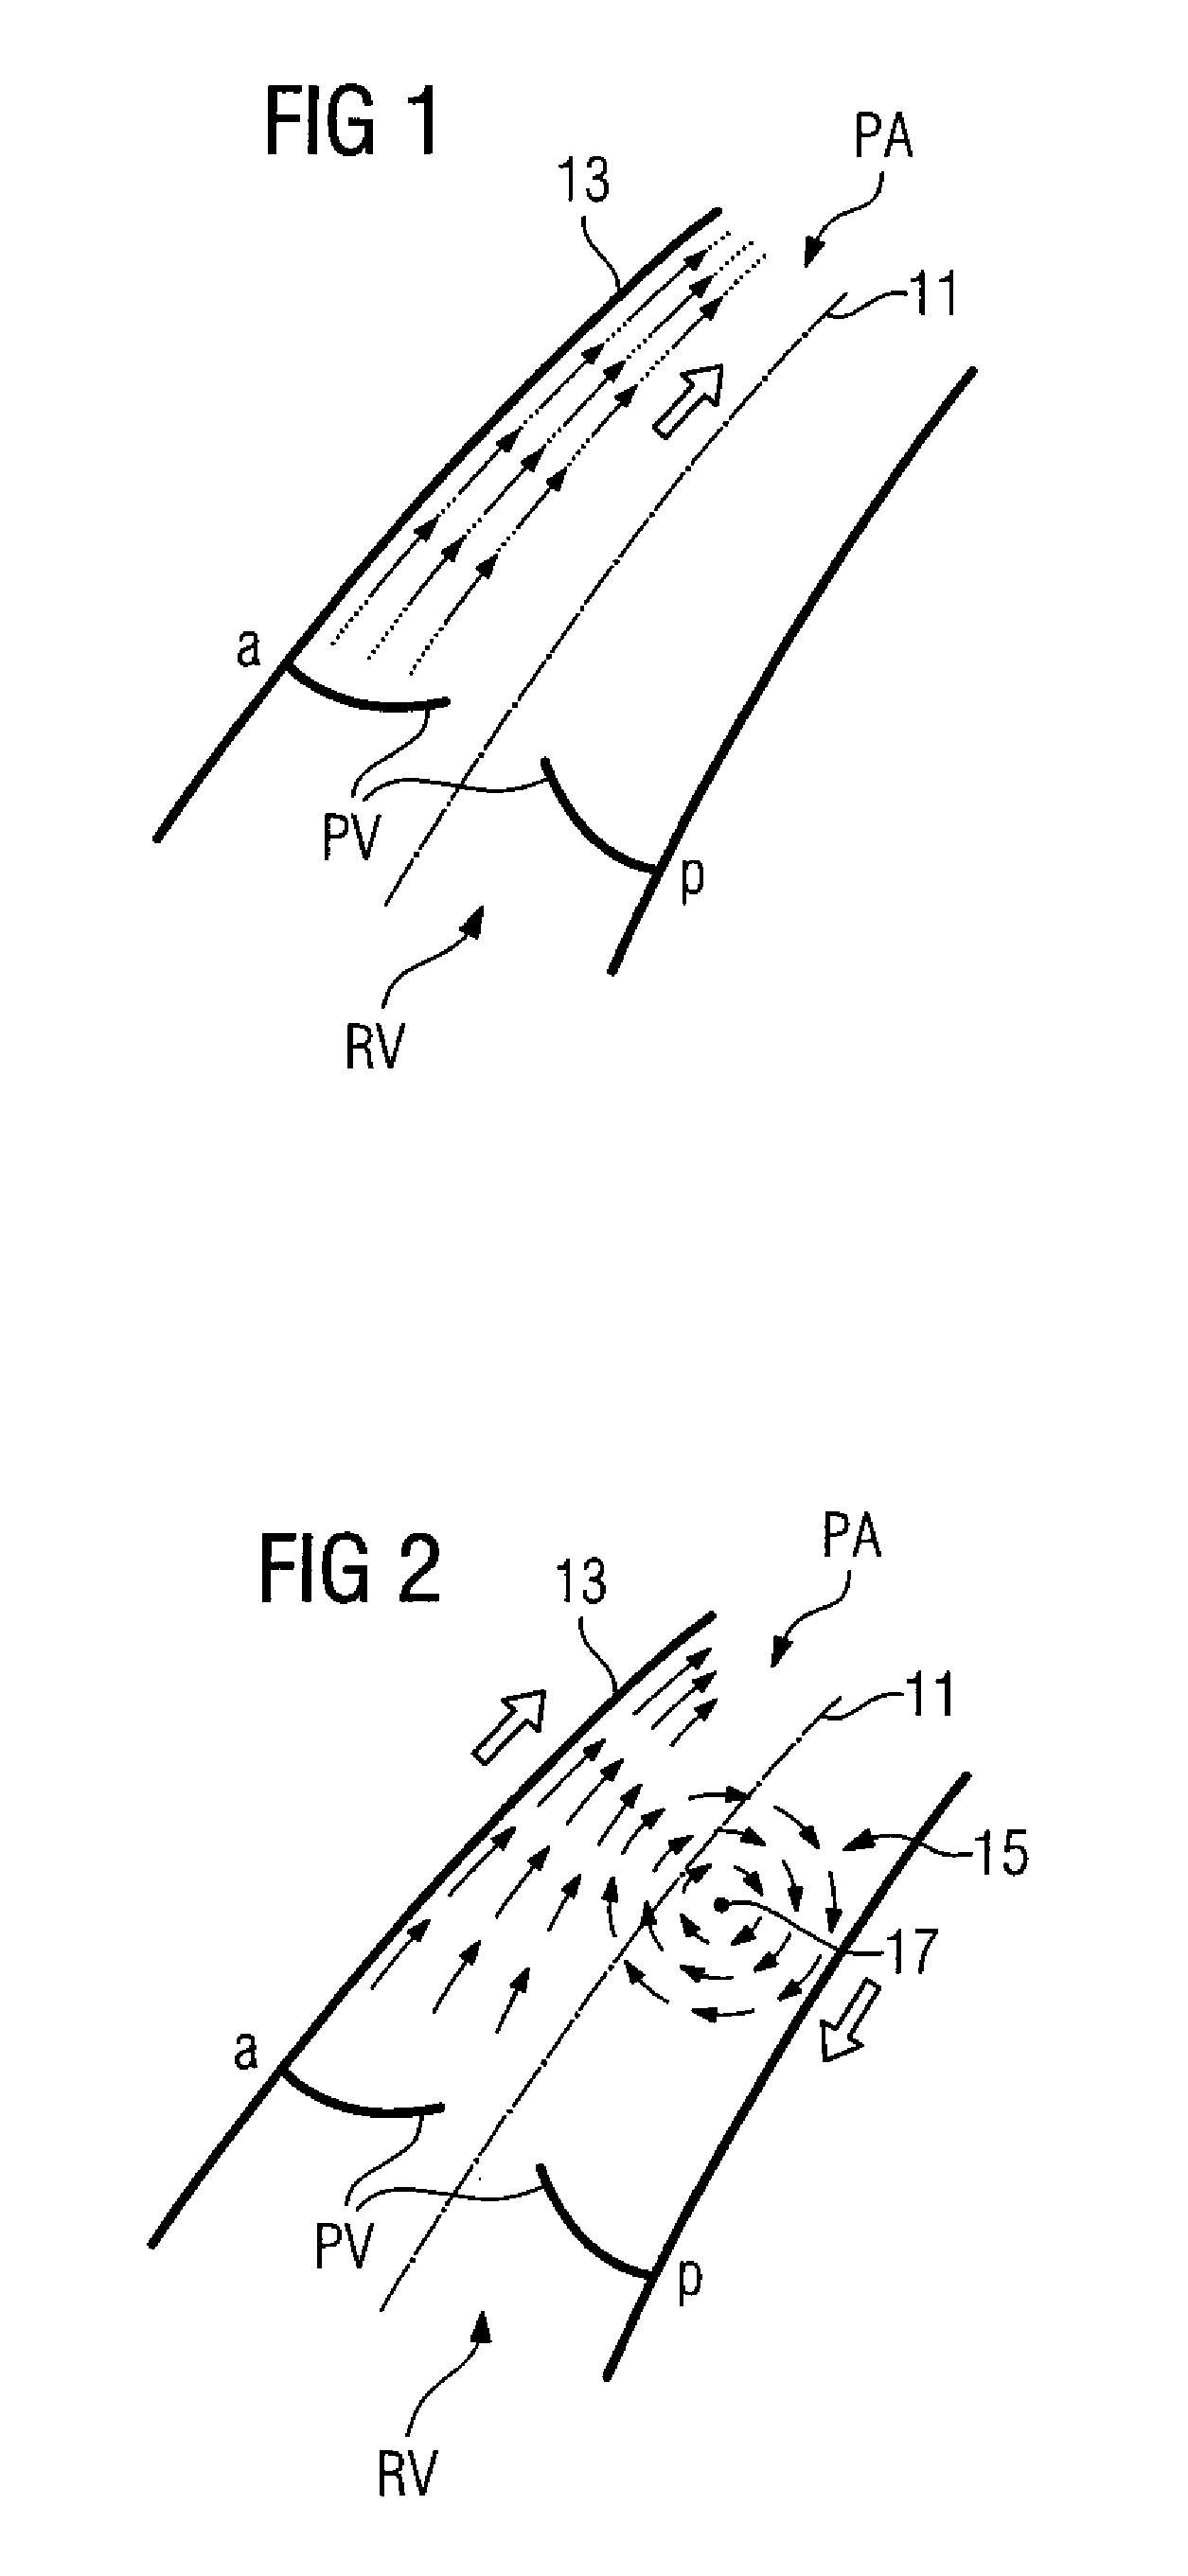 Method and medical apparatus for measuring pulmonary artery blood flow